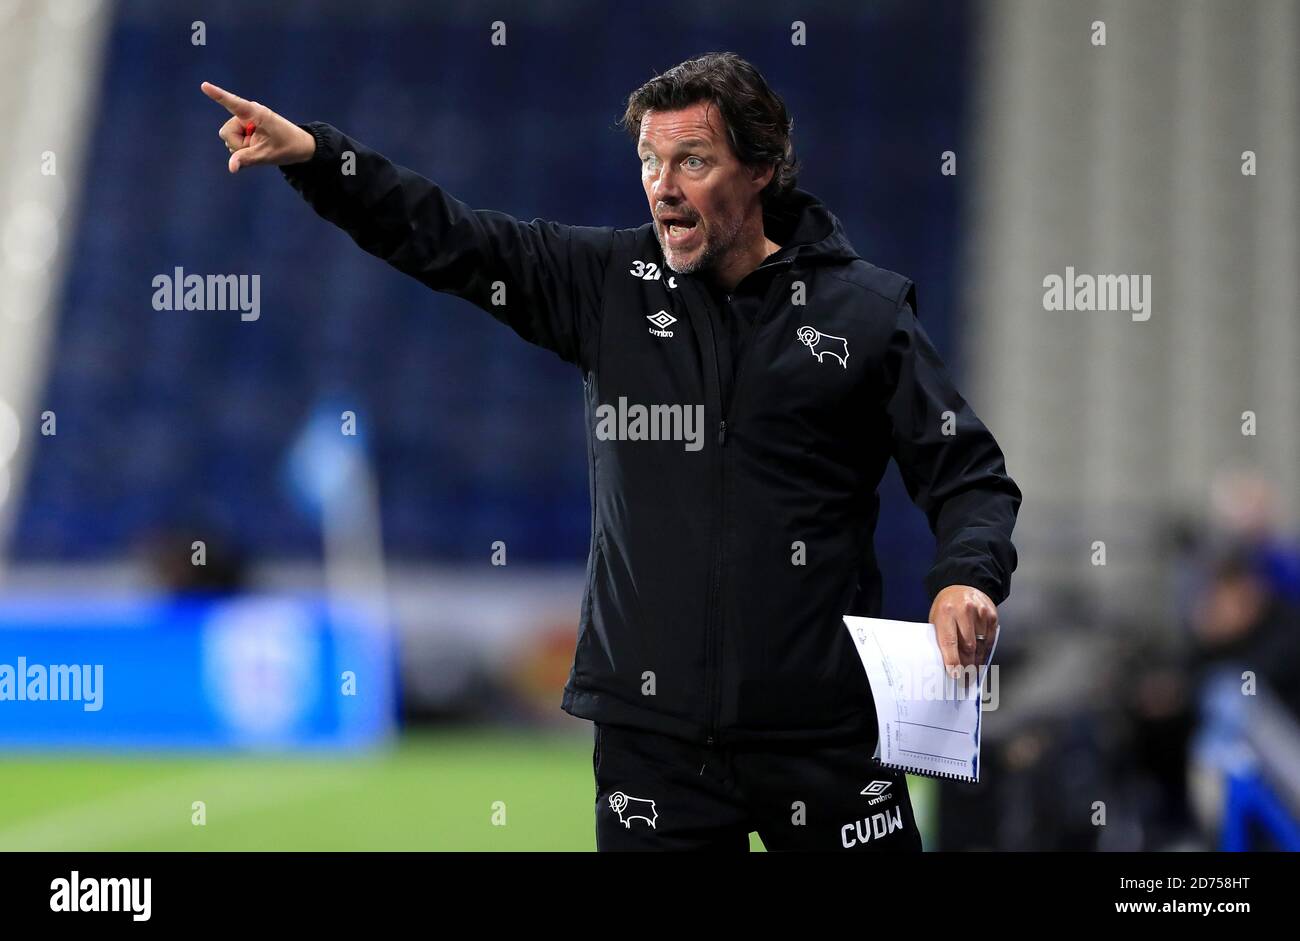 Derby County assistant manager Chris van der Weerden instructs his players during the Sky Bet Championship match at The John Smith's Stadium, Huddersfield. Stock Photo